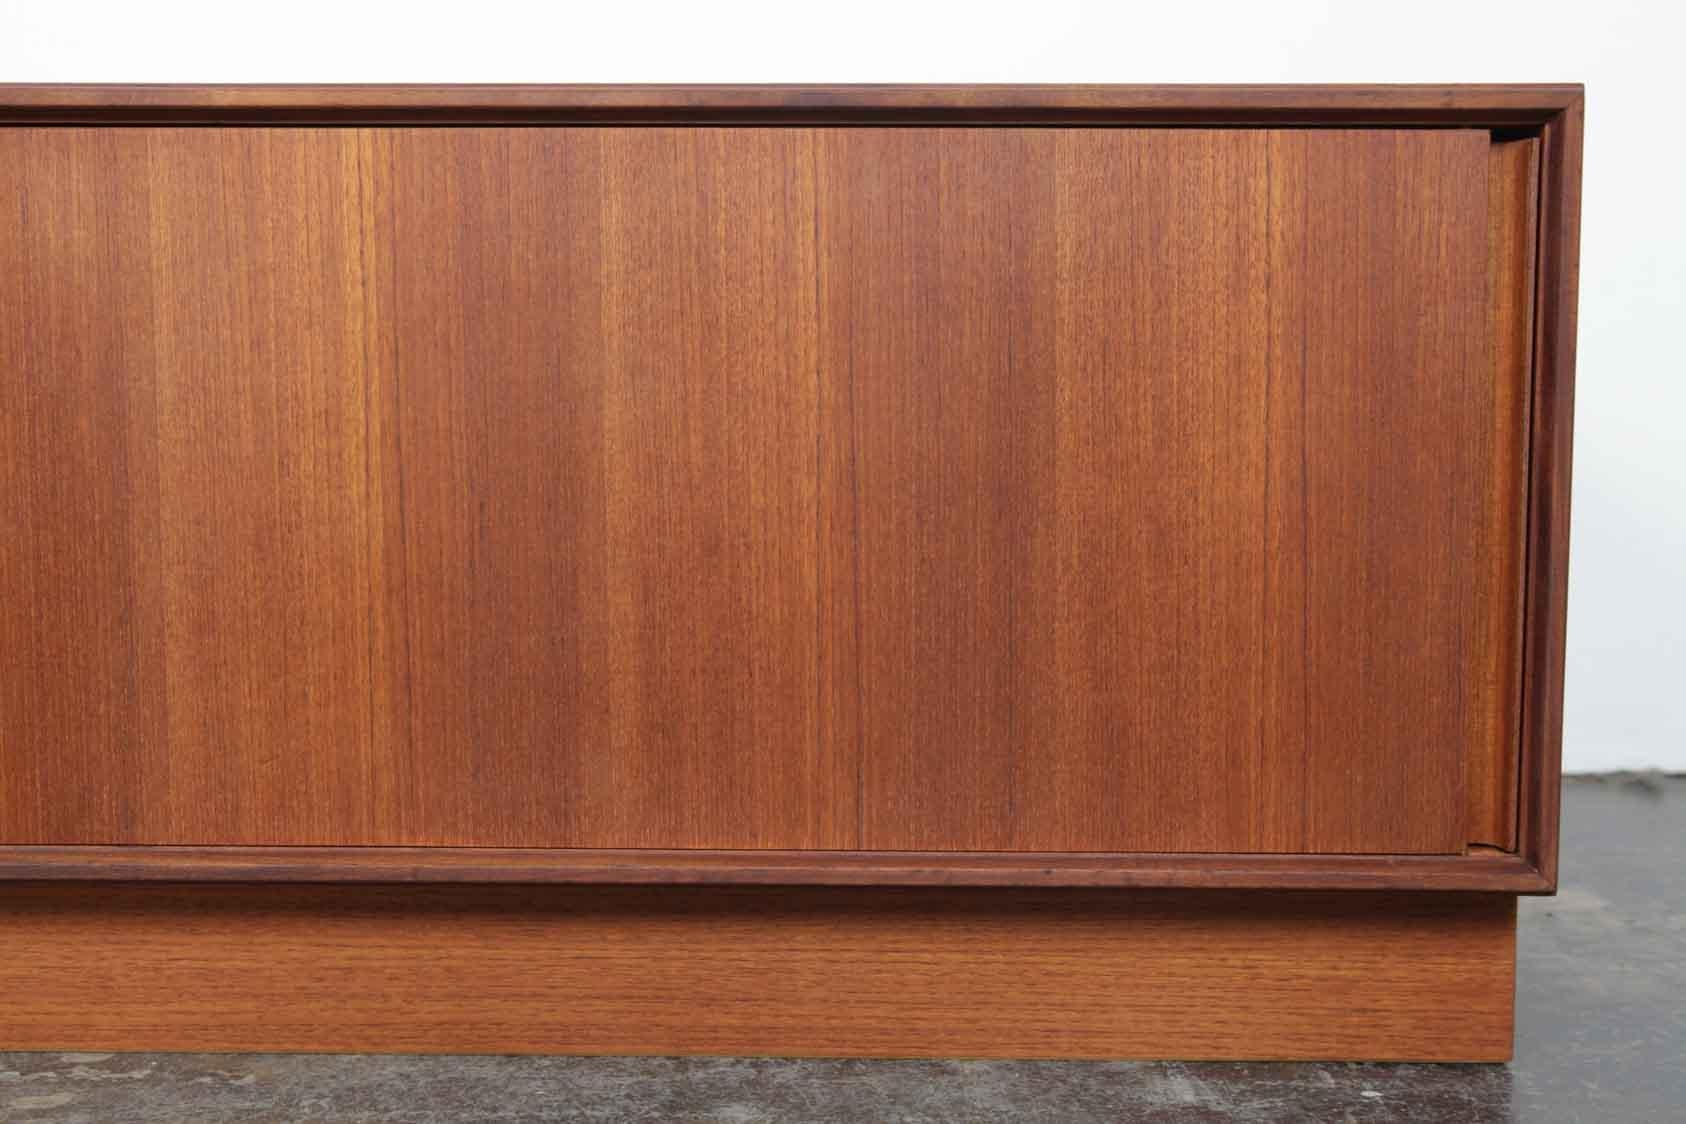 Low teak plinth based two-door sideboard by G Plan, 1960s, England. The seamless front gives way to doors that slide behind each other in a unique way. Newly refinished in a natural teak oil.